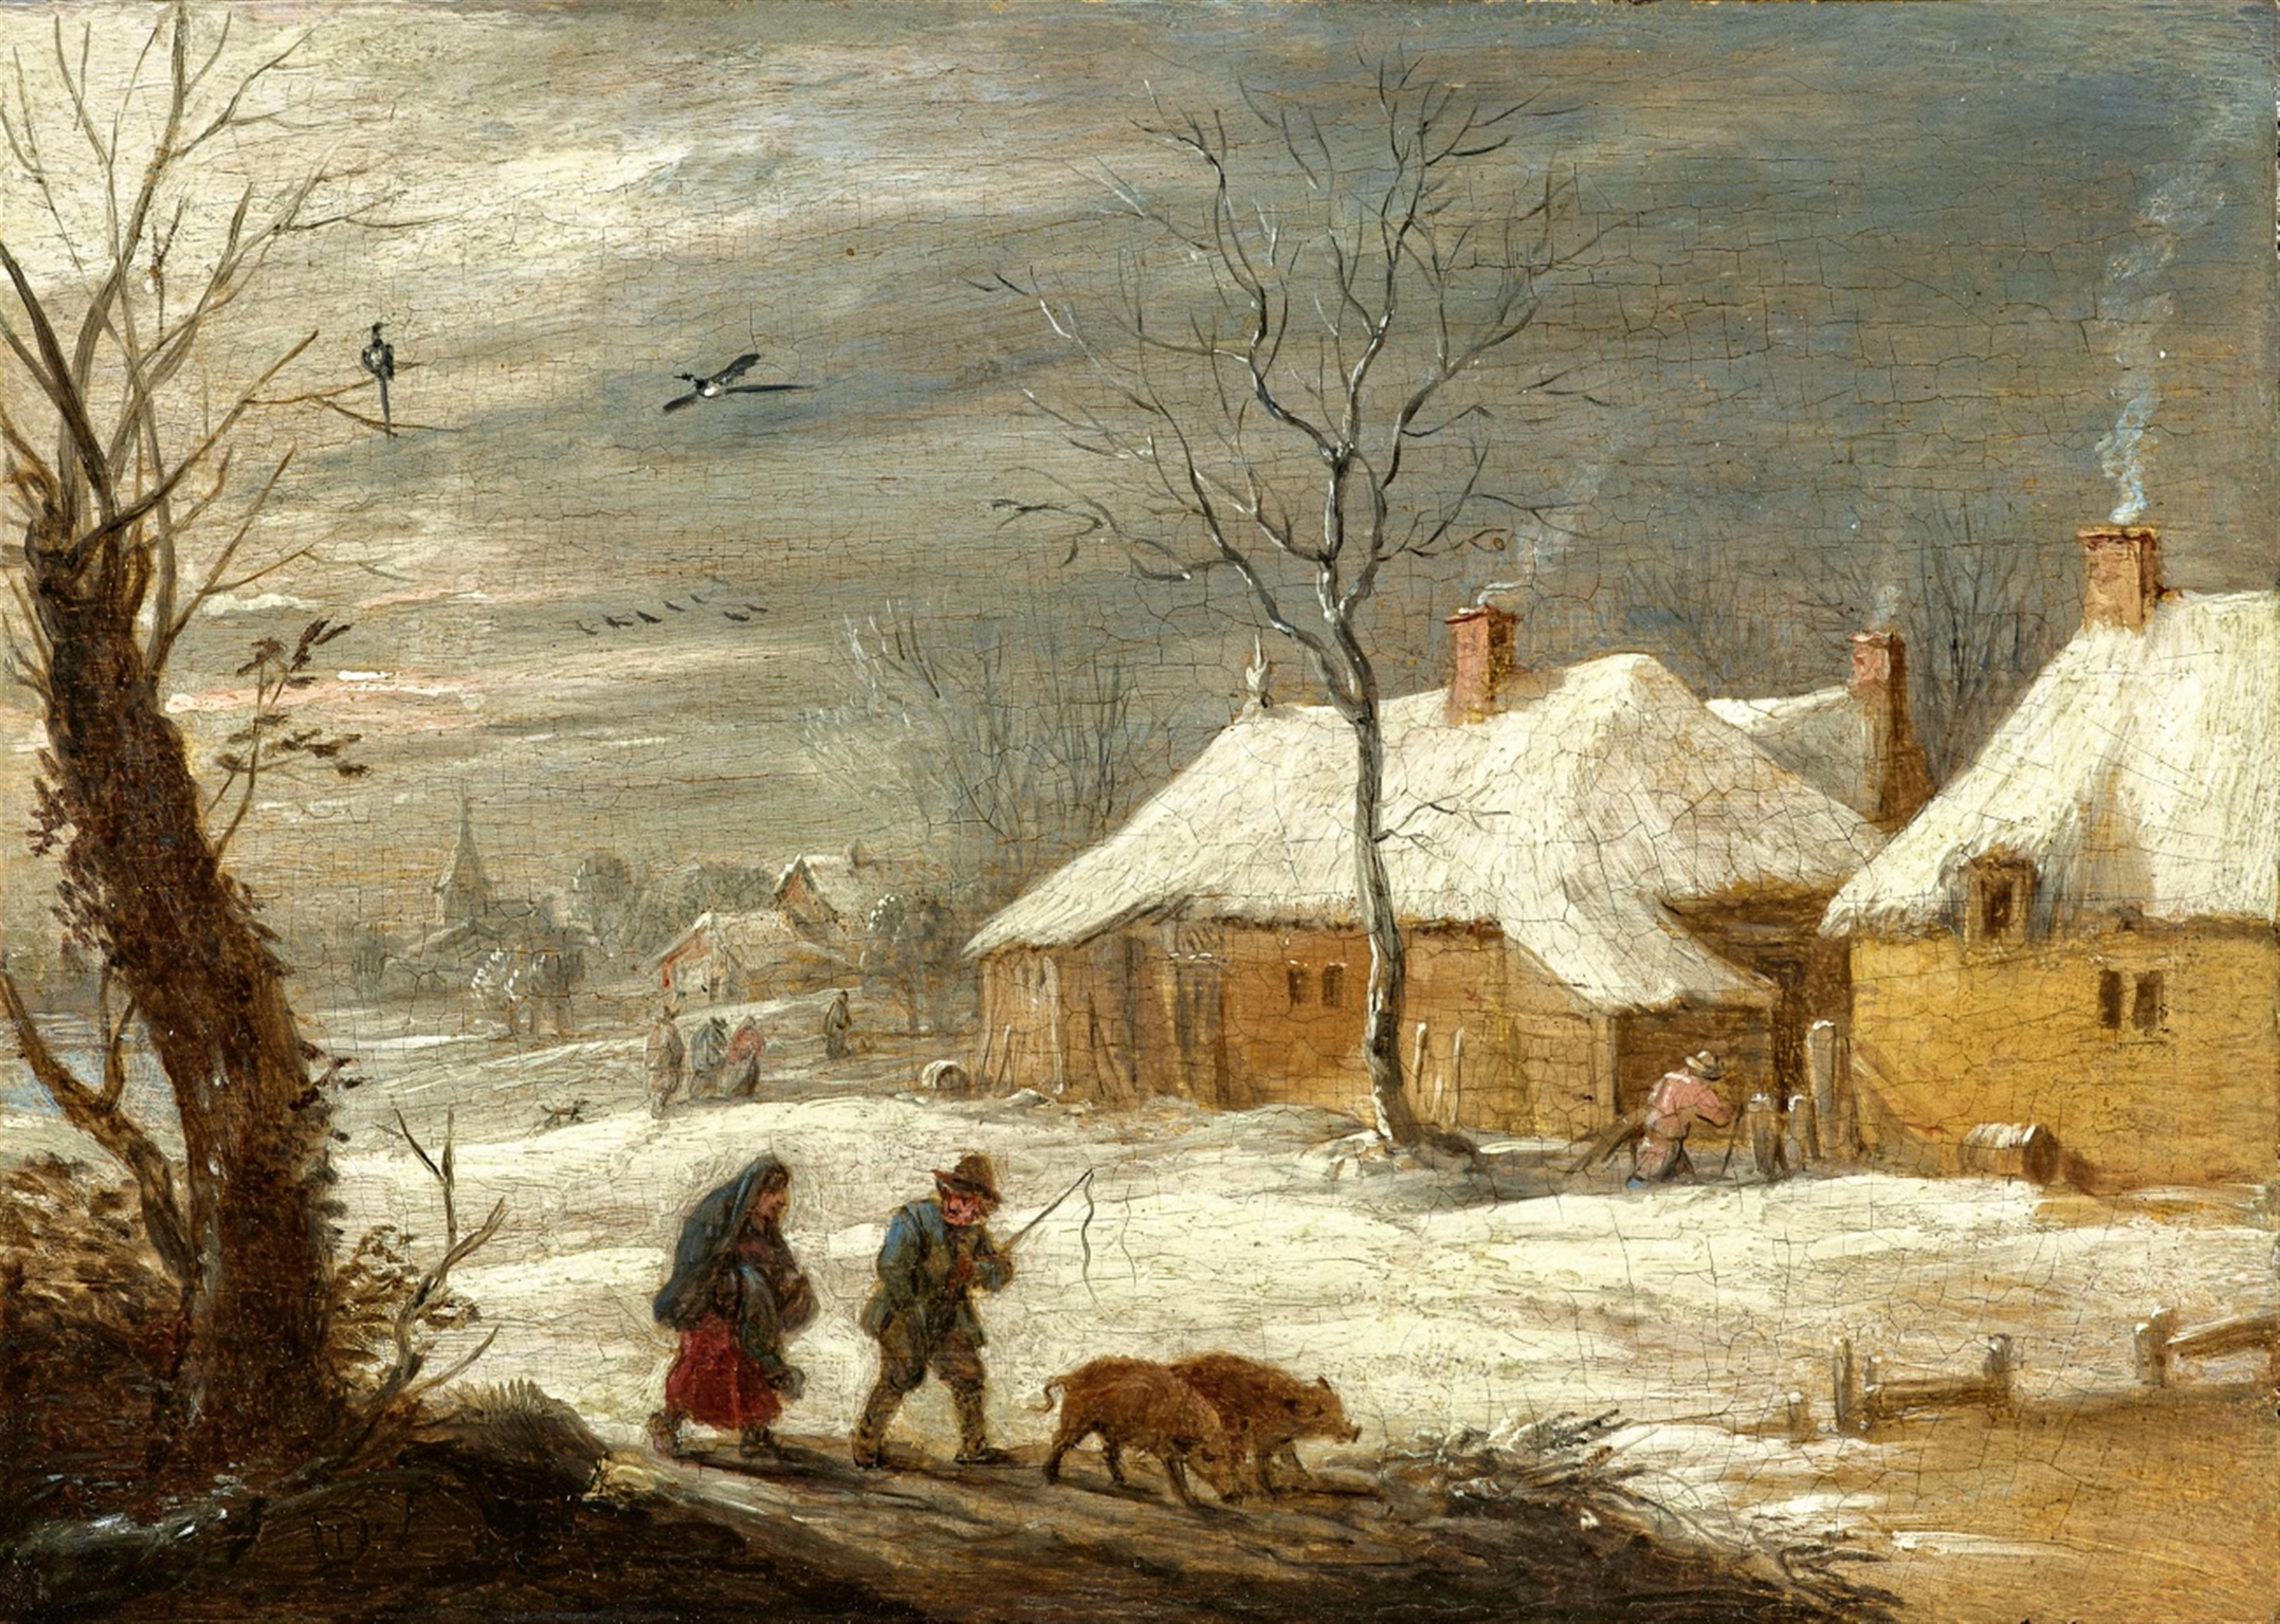 David Teniers the Younger - Winter Landscape with a Peasant Couple Spring Landscape with Two Peasants saying Farewell - image-1